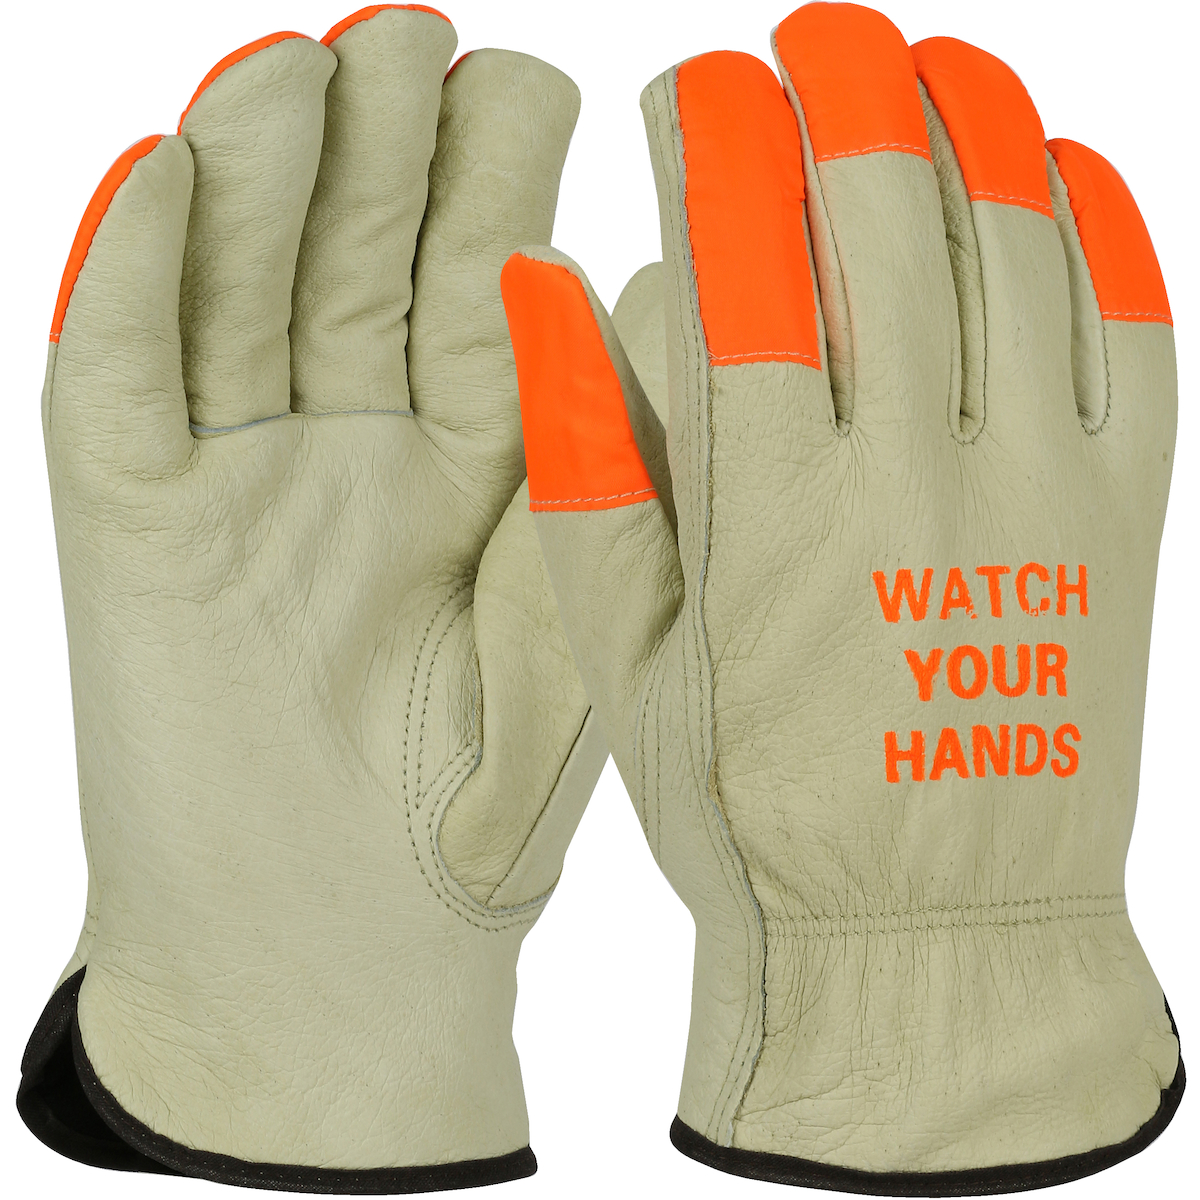 THERMAL PIGSKIN DRIVER WATCH YOUR HANDS - Cold-Resistant Gloves